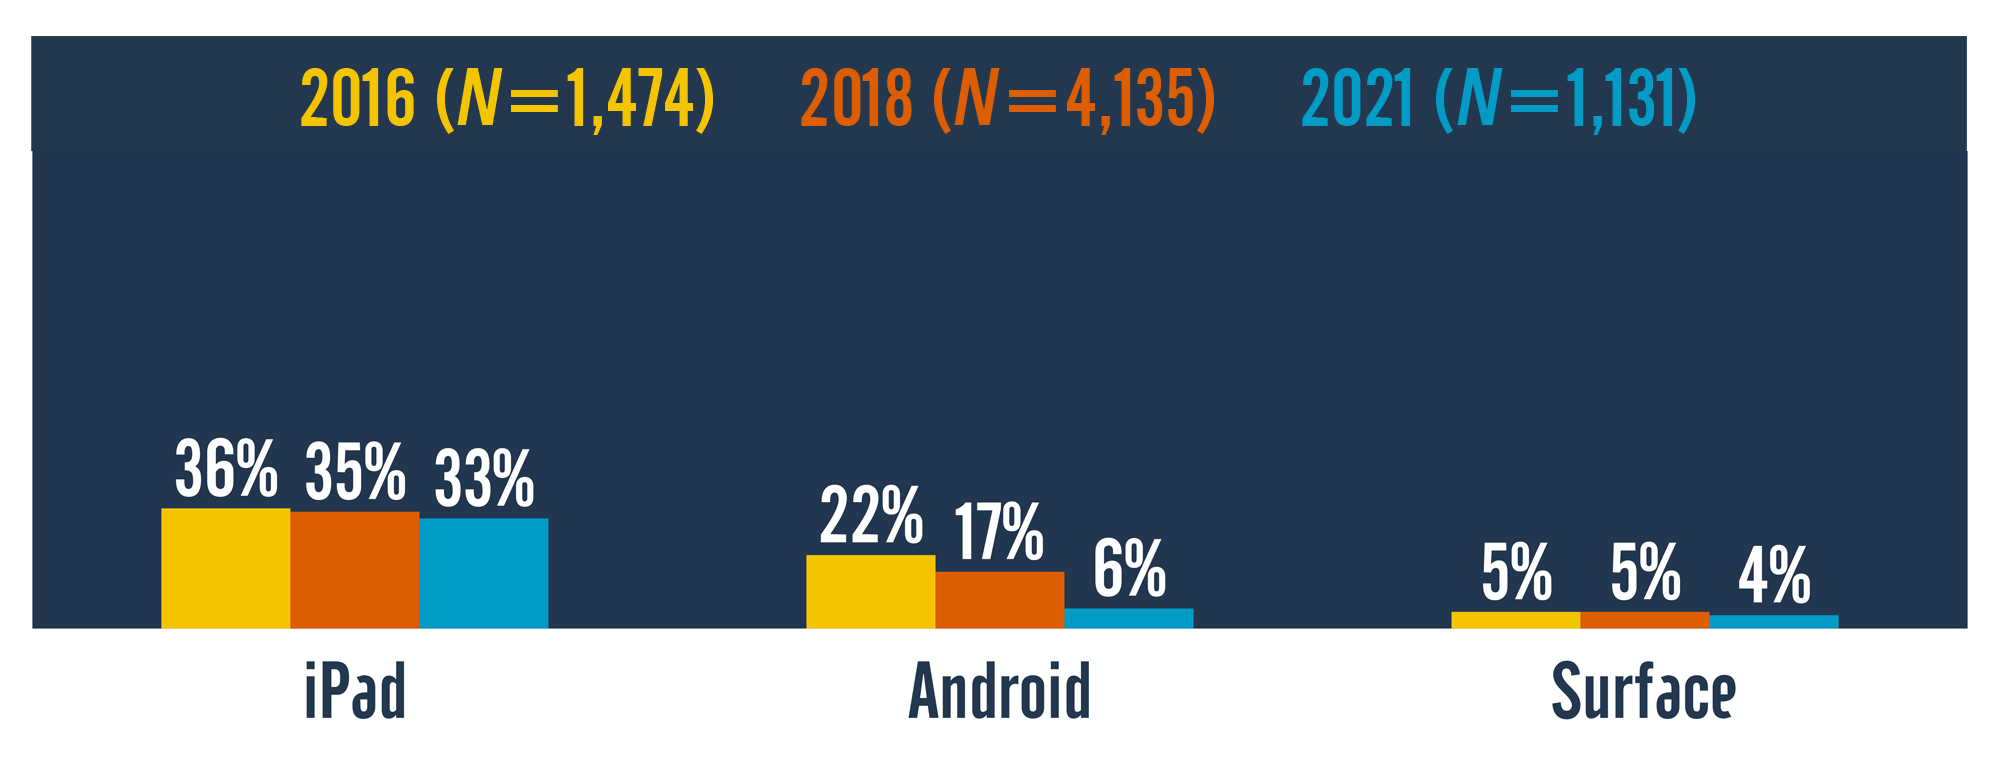 Column chart comparing tablet ownership by brand across three survey years (2016, 2018, and 2021). Ownership of iPads in those three years was 36%, 35%, and 33%. Ownership of Android tablets was 22%, 17%, and 6%. Ownership of Surface tablets was 5%, 5%, and 4%.